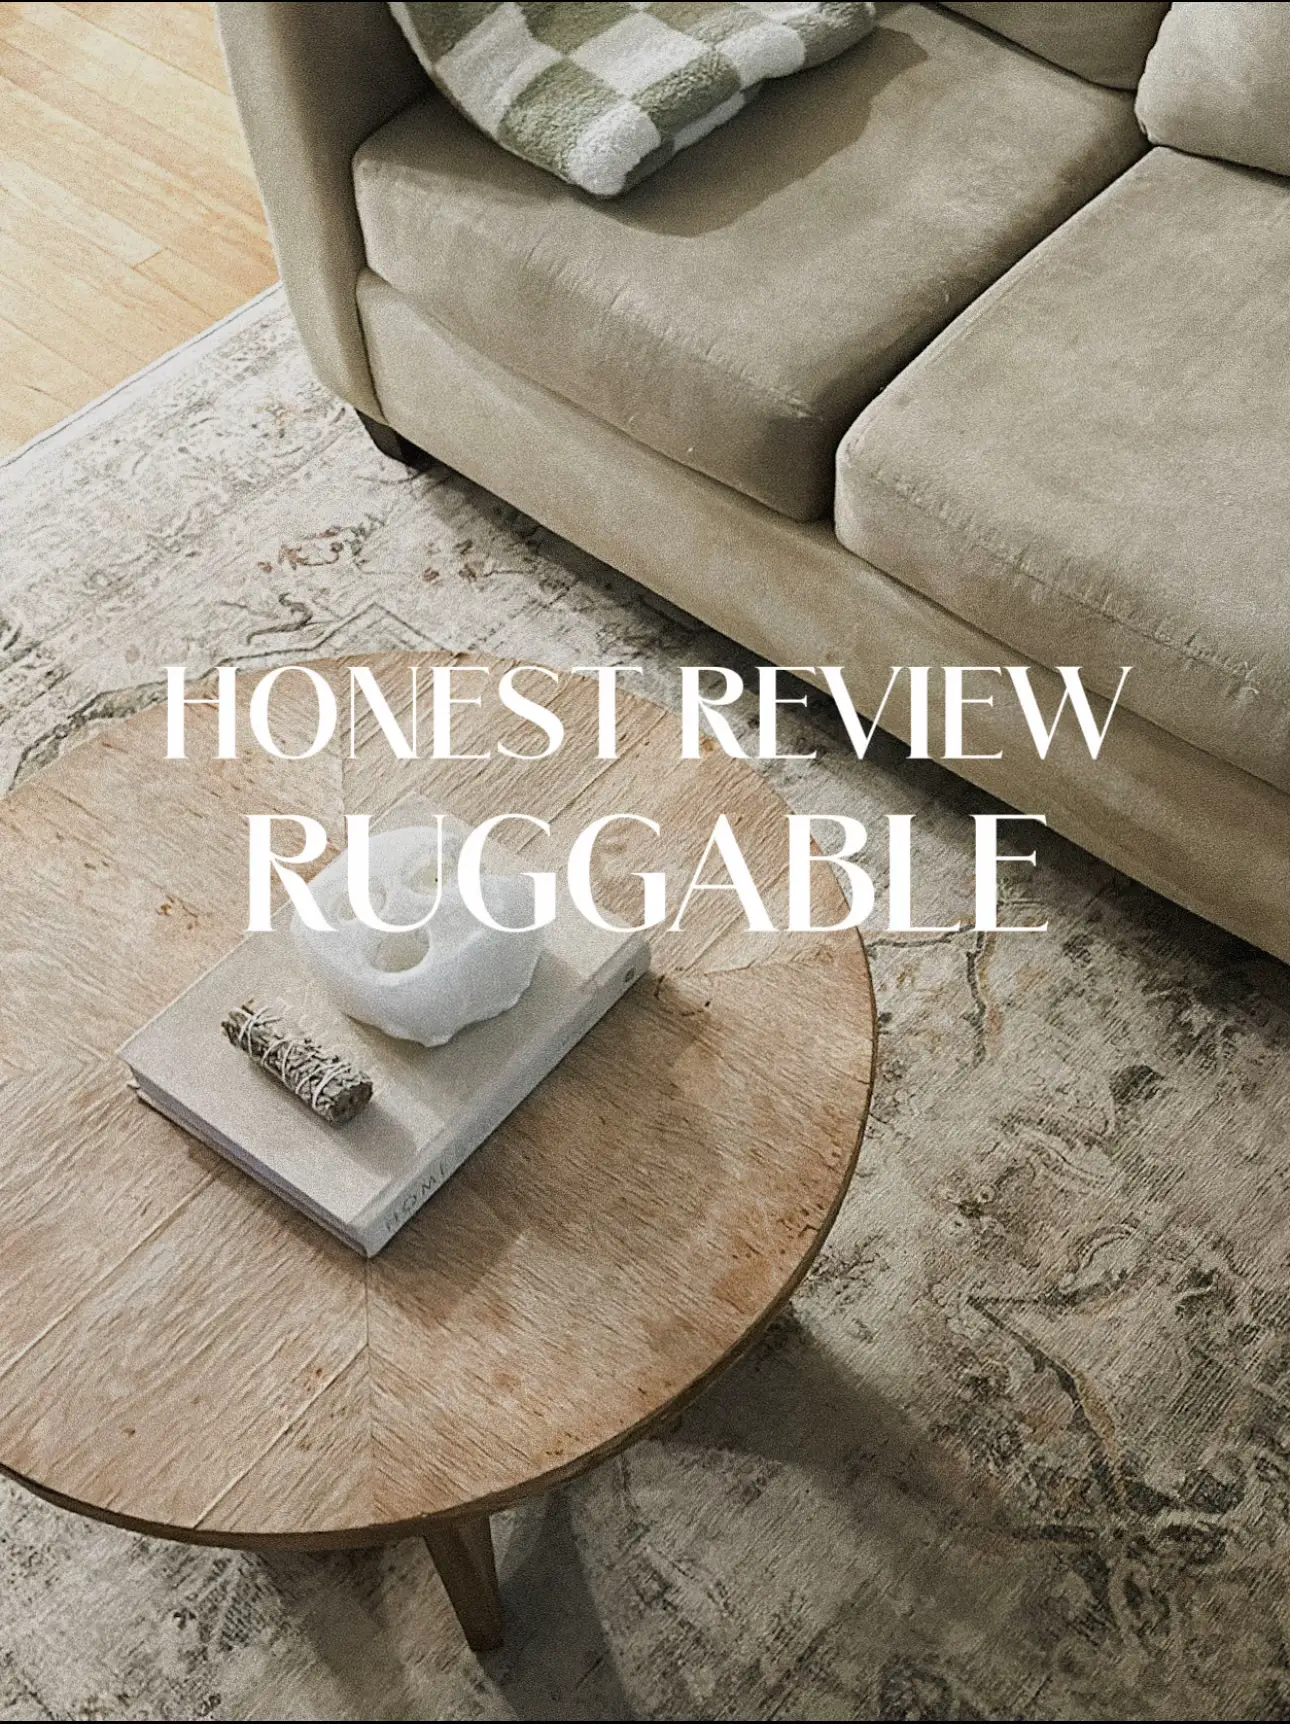 Is Ruggable Worth It? My Review After Buying 5 Washable Rugs - So